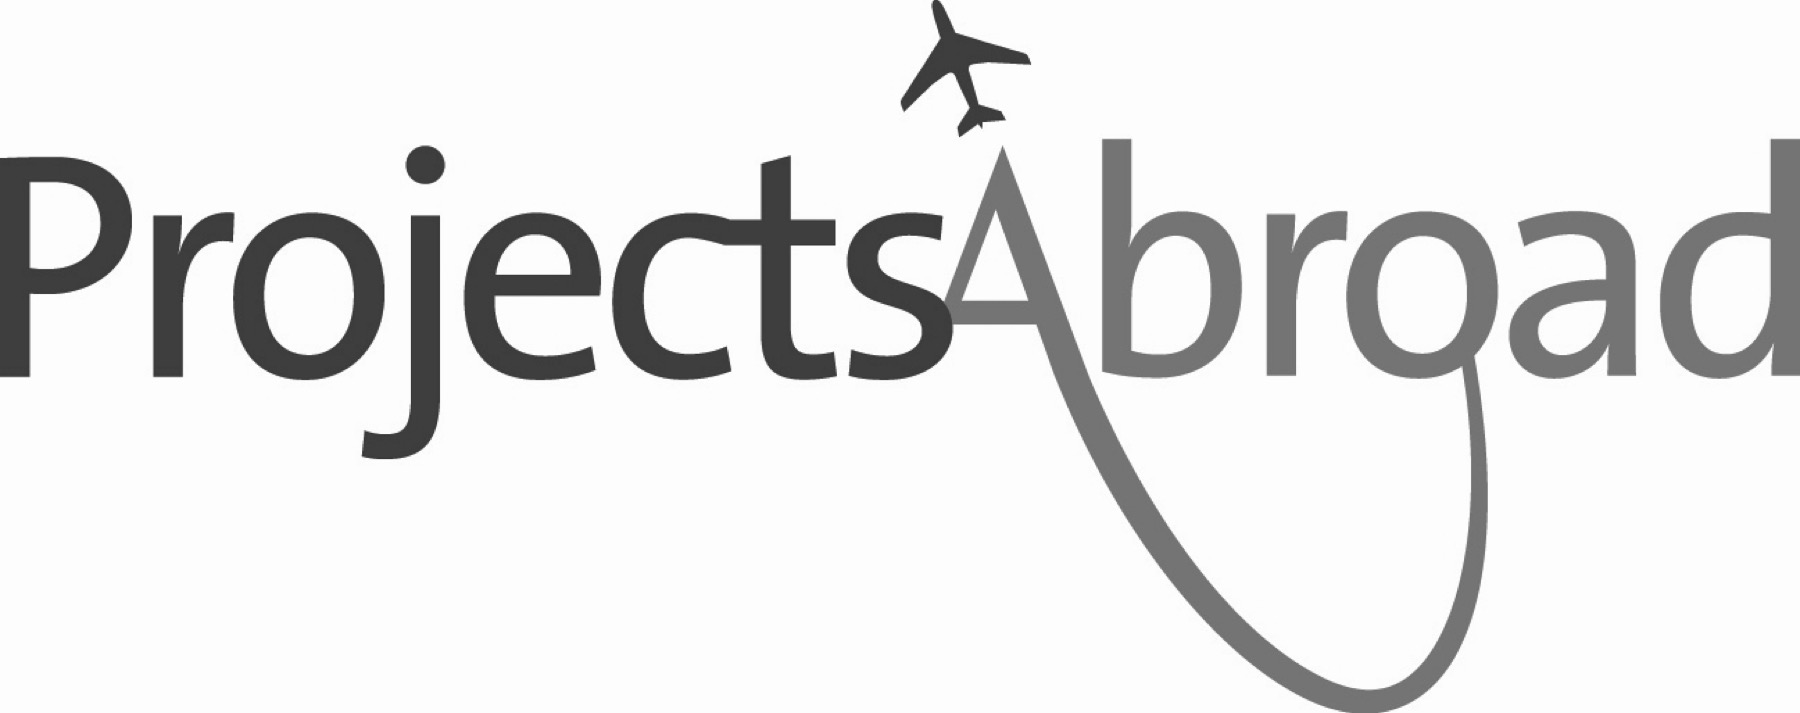 Projects Abroad logo